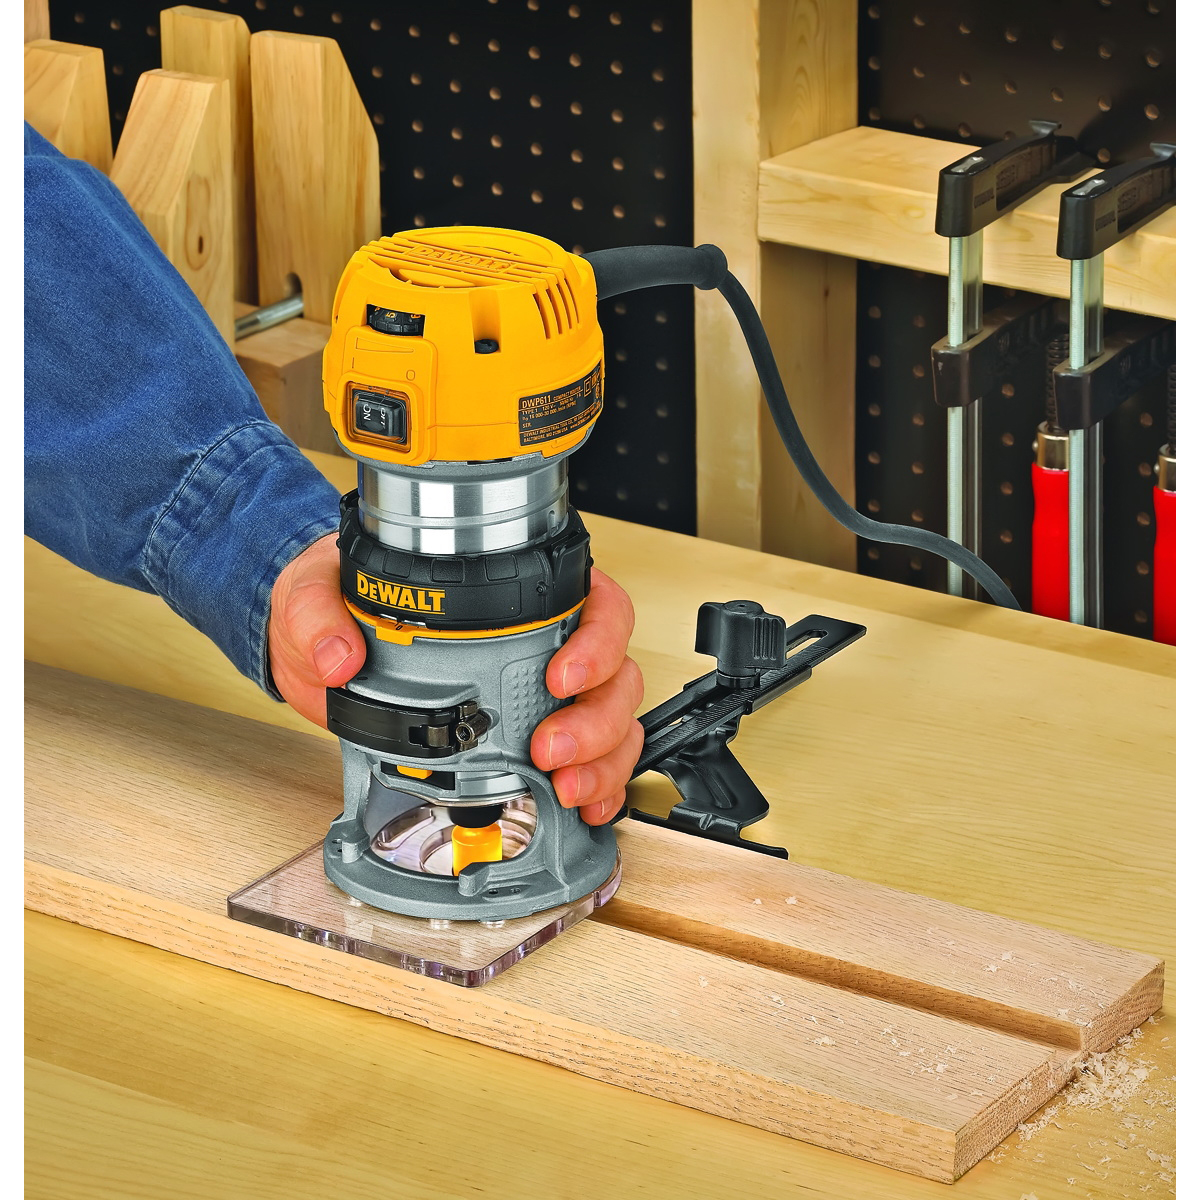 DeWALT DWP611 Compact Router with LED, 7 A, 16,000 to 27,000 rpm Load Speed, 1-1/2 in Max Stroke - 5